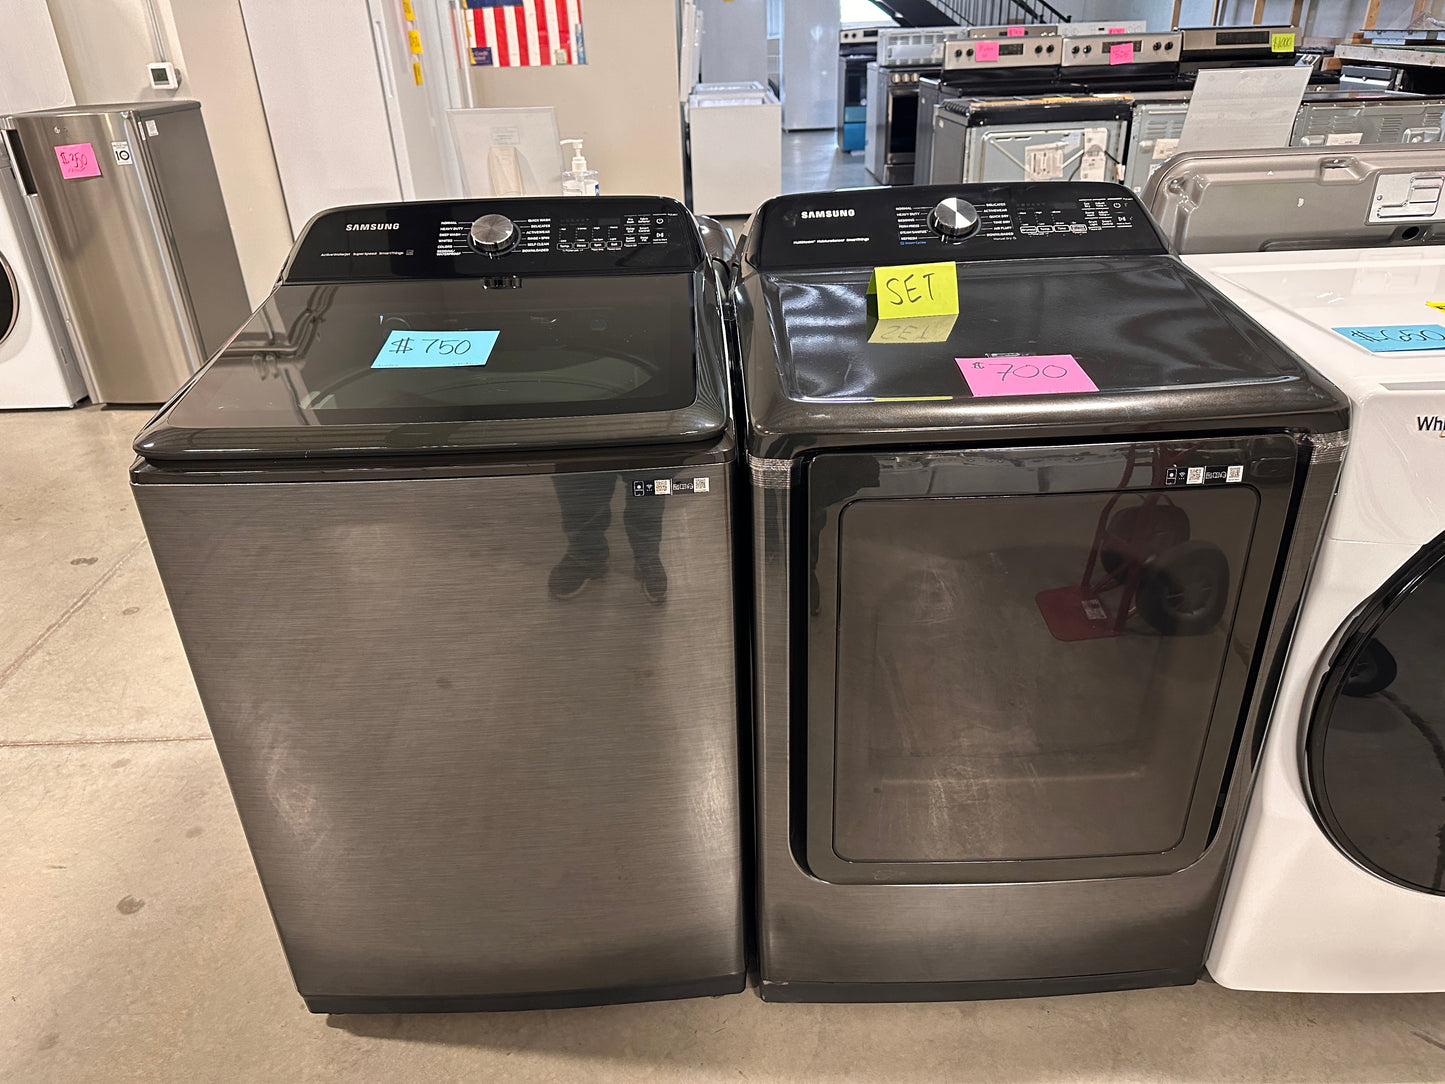 GREAT NEW TOP LOAD SAMSUNG LAUNDRY SET - WAS12952 DRY12295